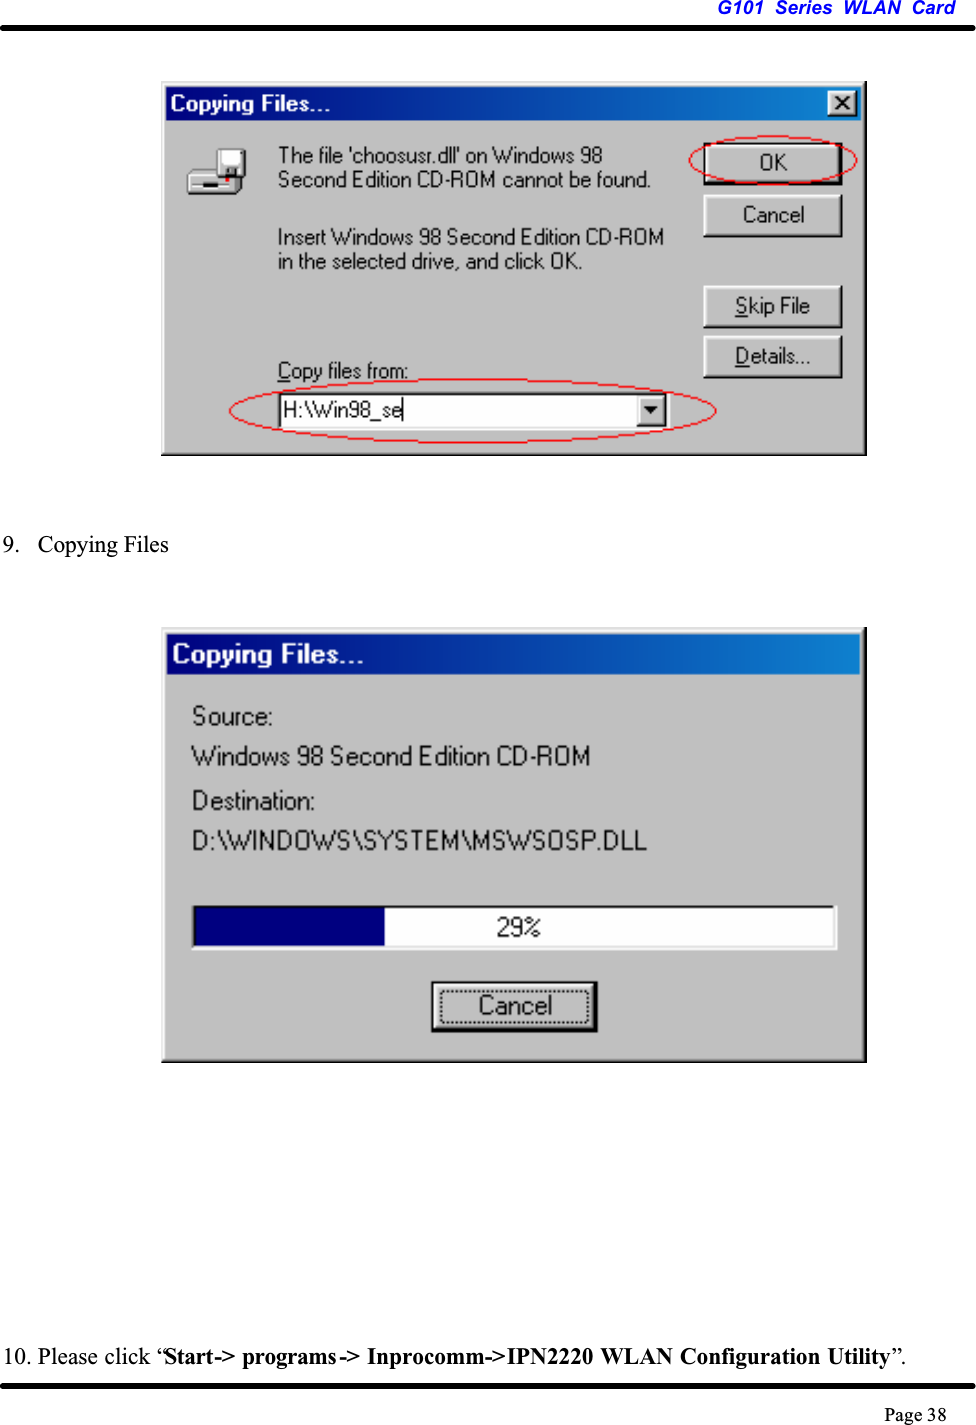 G101 Series WLAN CardPage 389. Copying Files10. Please click “Start-&gt; programs -&gt; Inprocomm-&gt;IPN2220 WLAN Configuration Utility”.